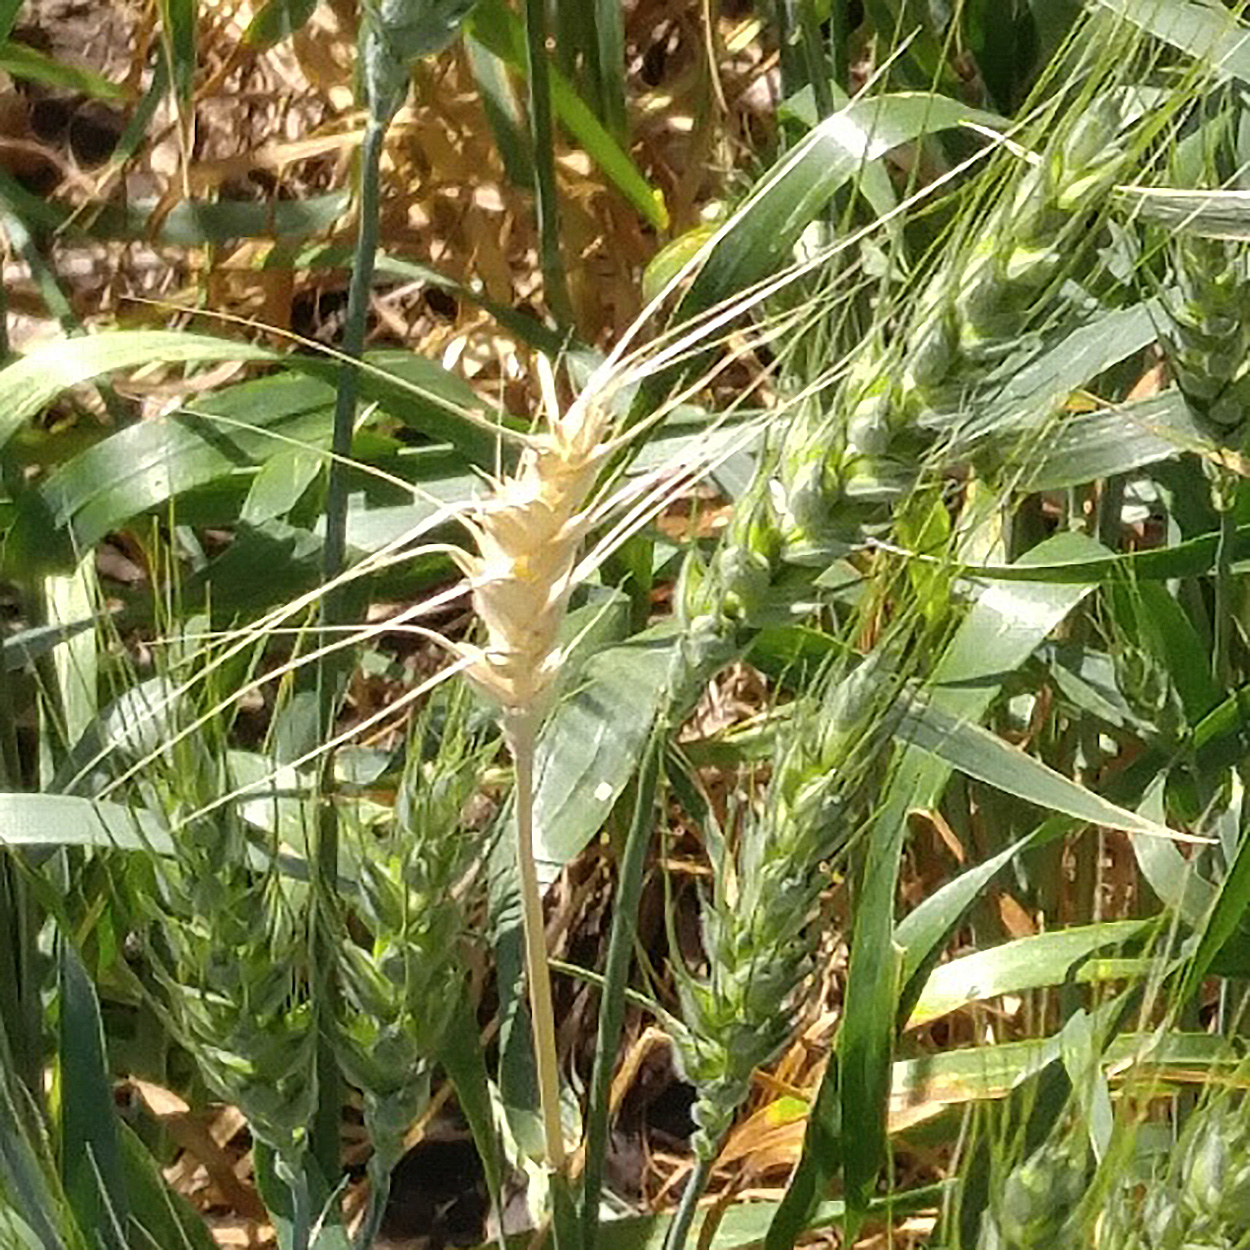 White wheat head on an otherwise green plant.